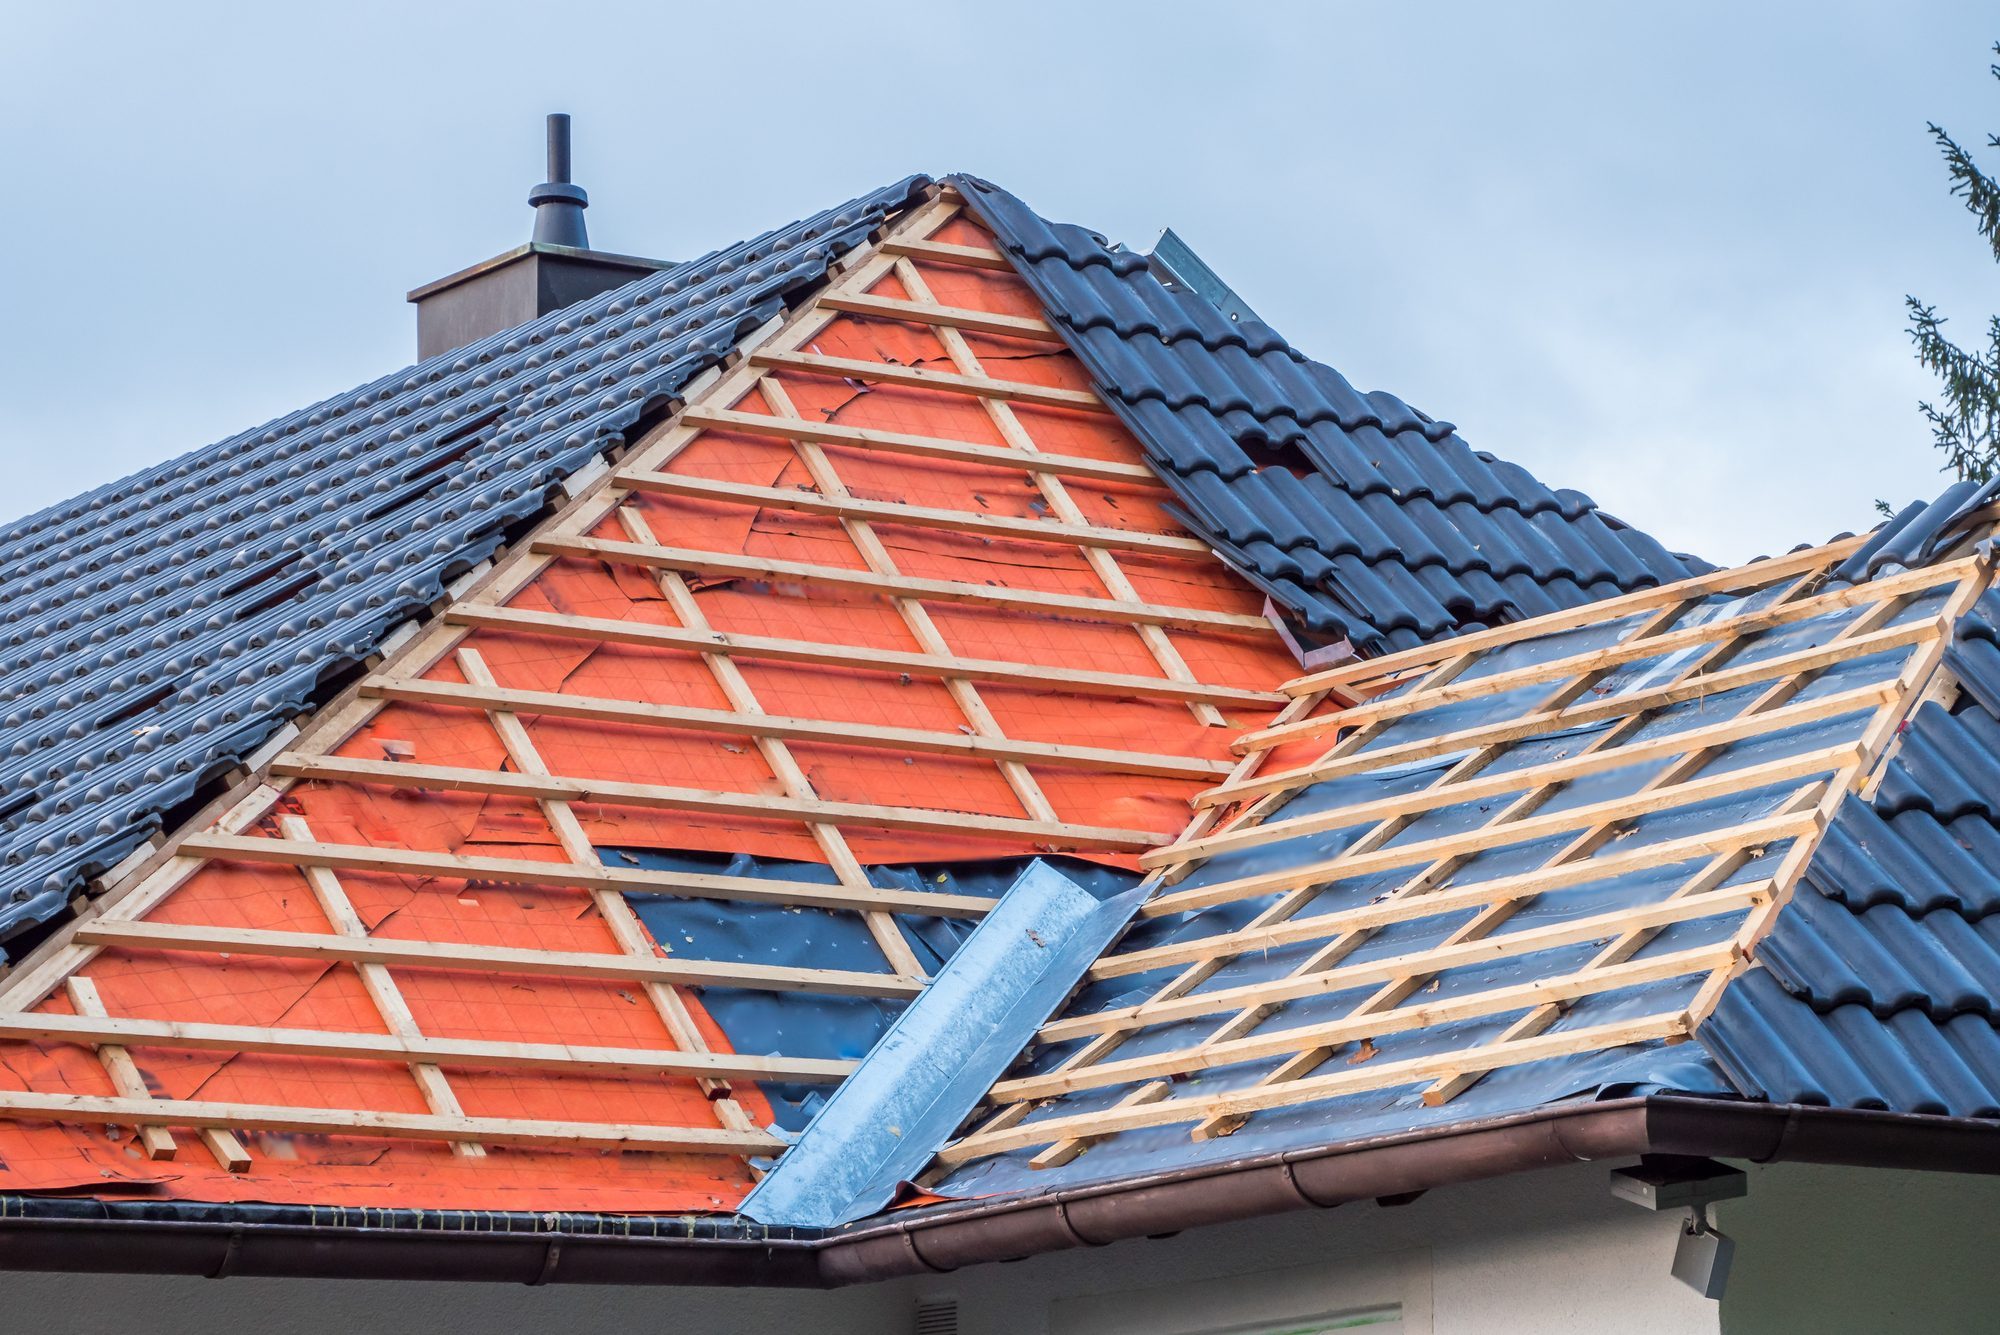 How Much Does a Roof Replacement Cost?